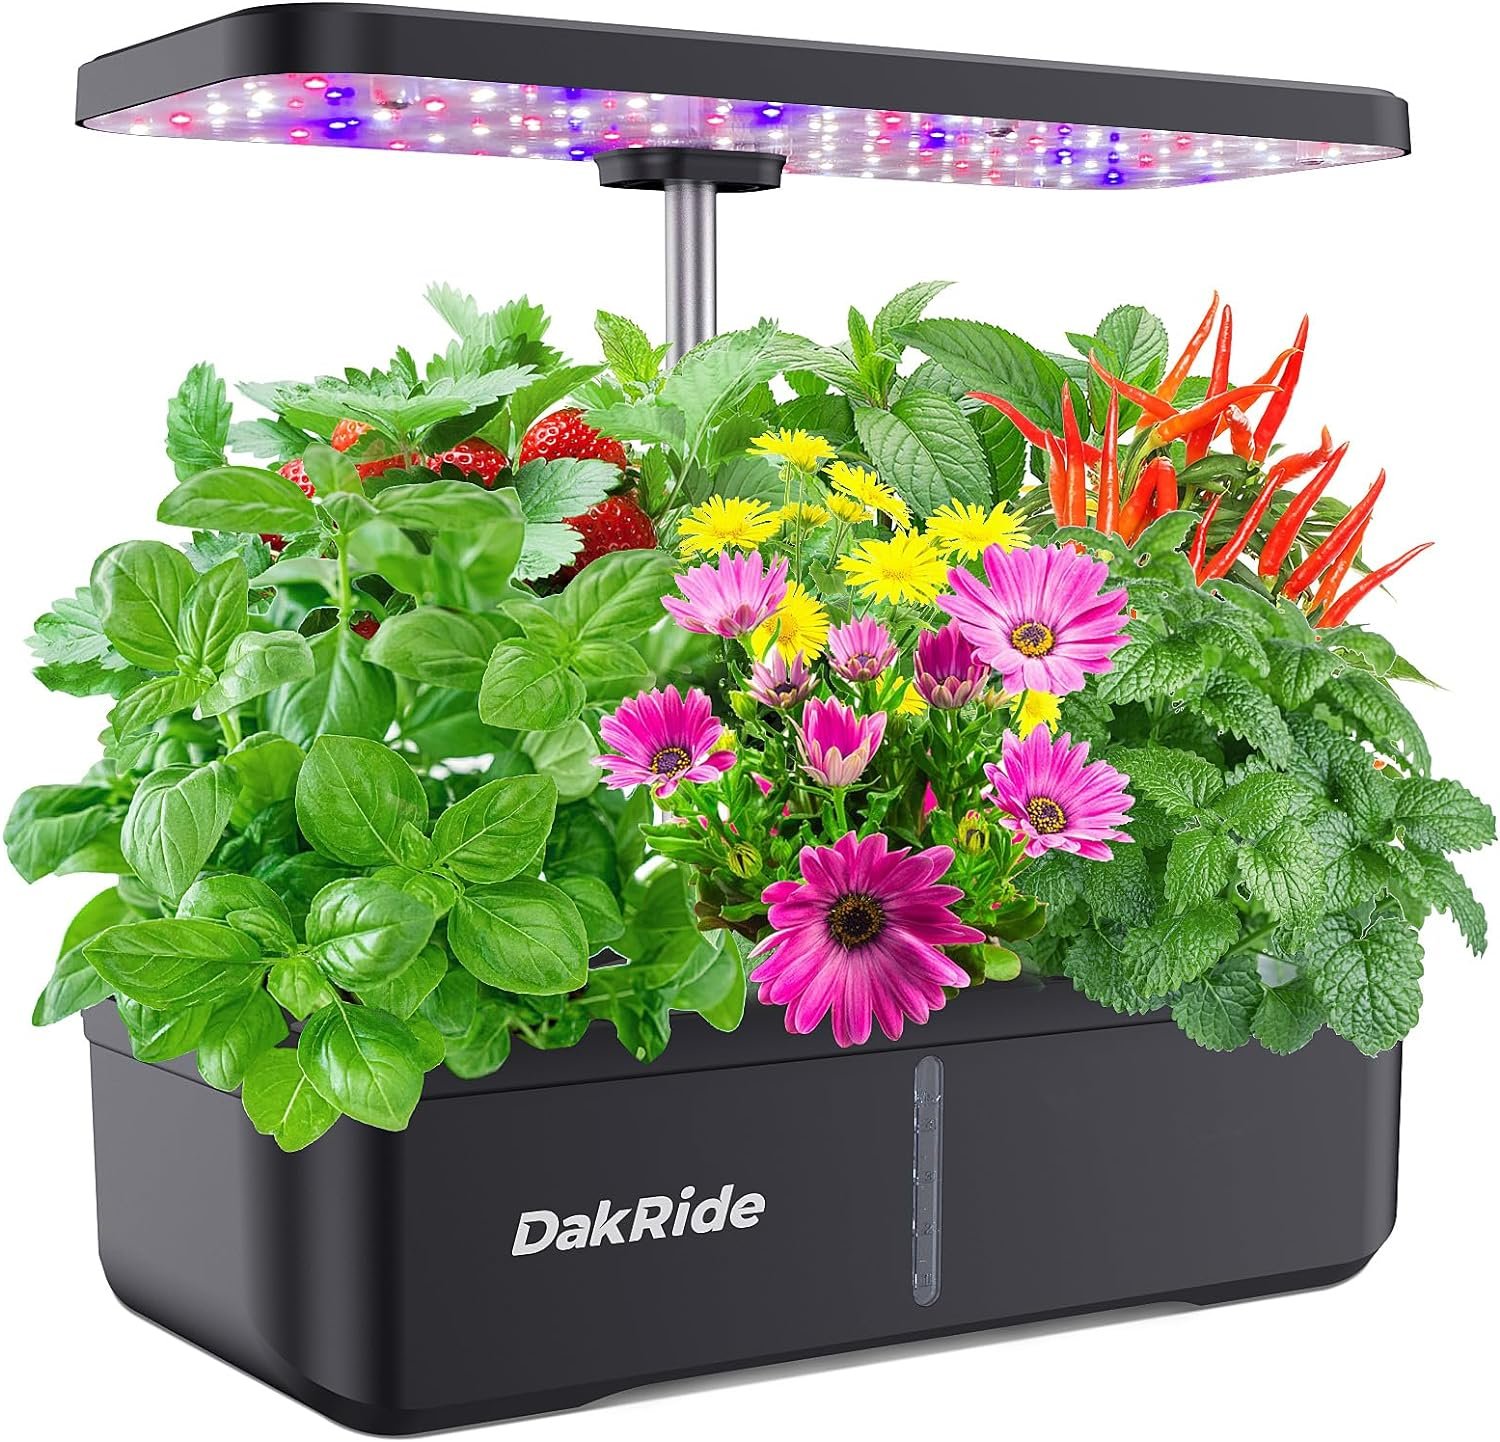 dakride hydroponics growing system review